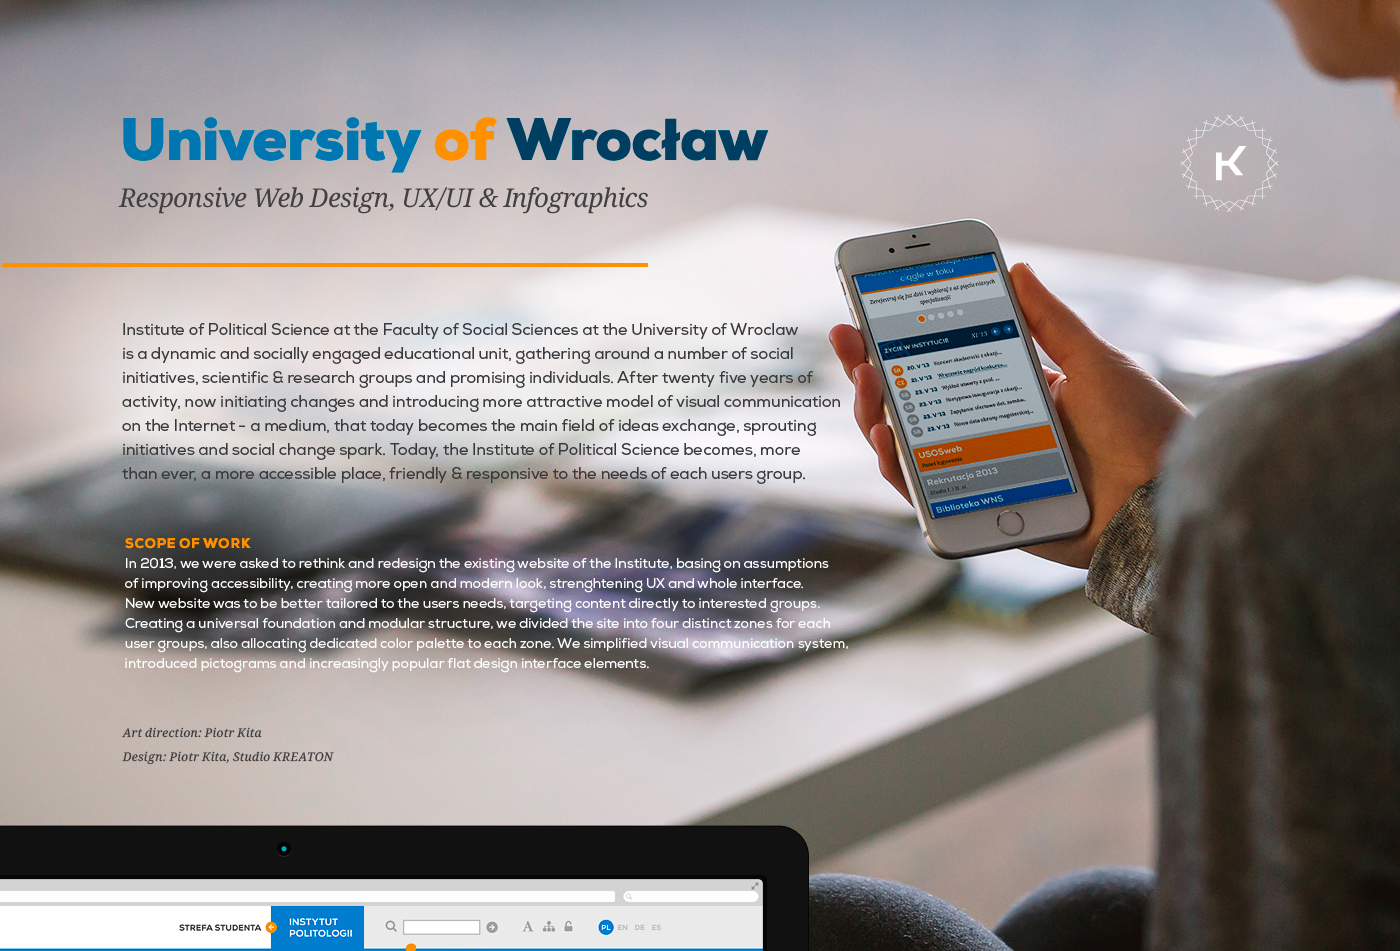 University wroclaw wrocław institute Education Web rwd Responsive flat UI material icons pictograms infographic color